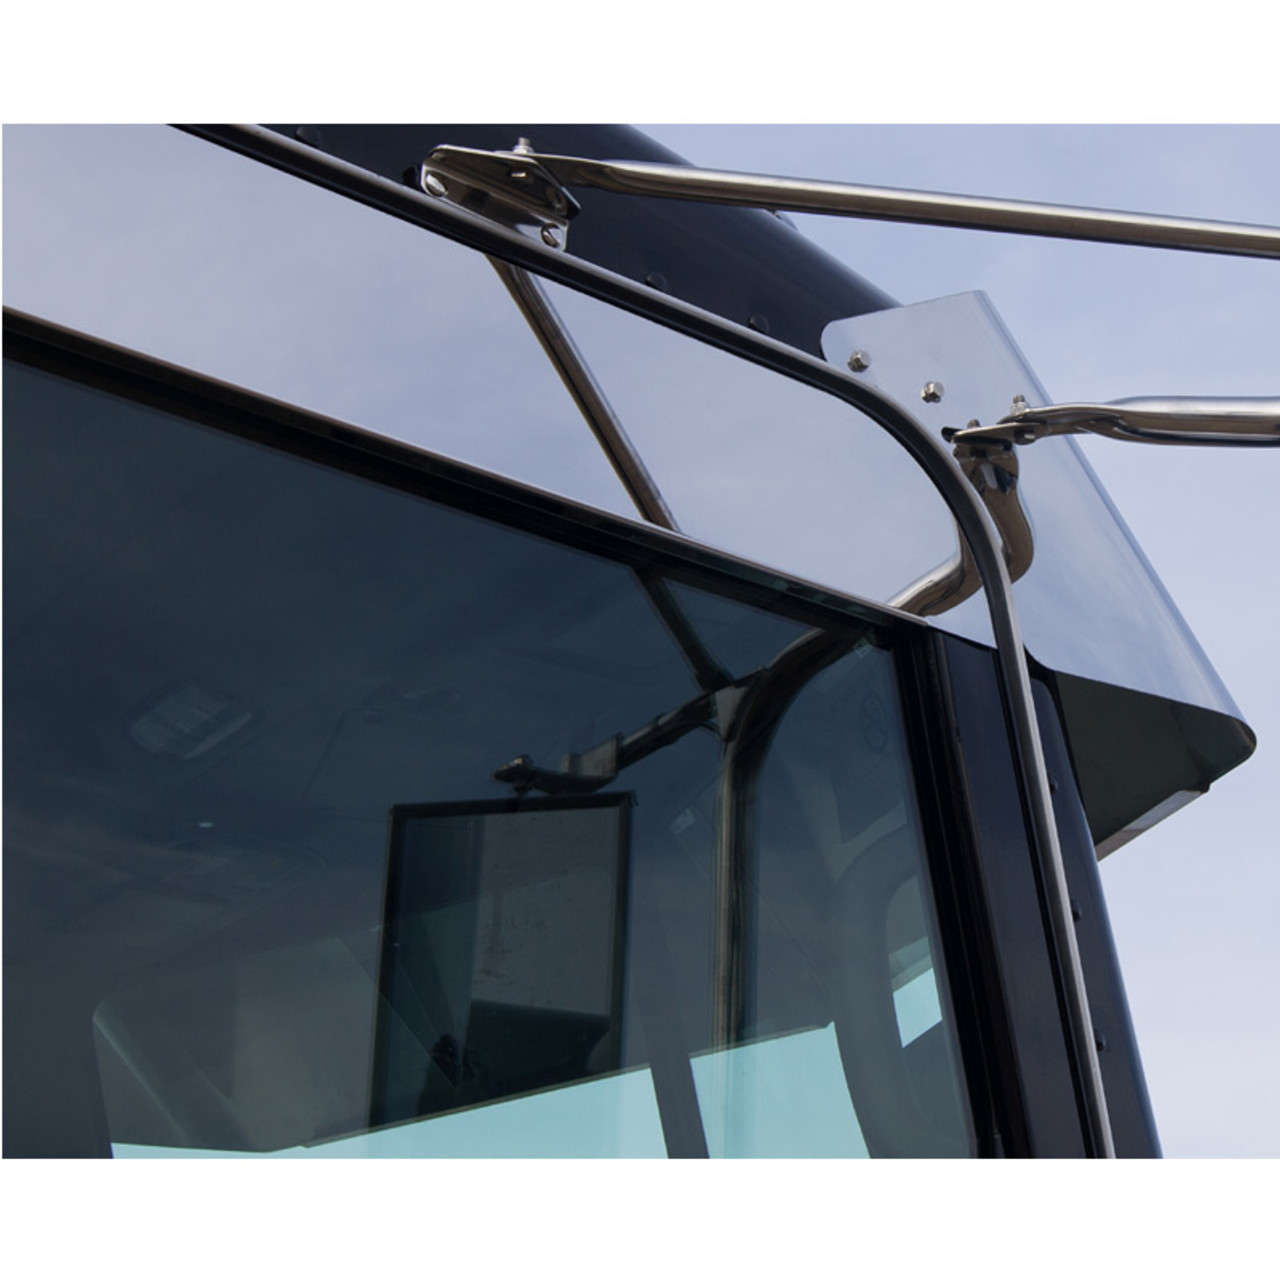 PETERBILT 2005 & UP STAINLESS STEEL CHOP-TOP WINDOW TRIM FOR CAB MOUNTED MIRRORS